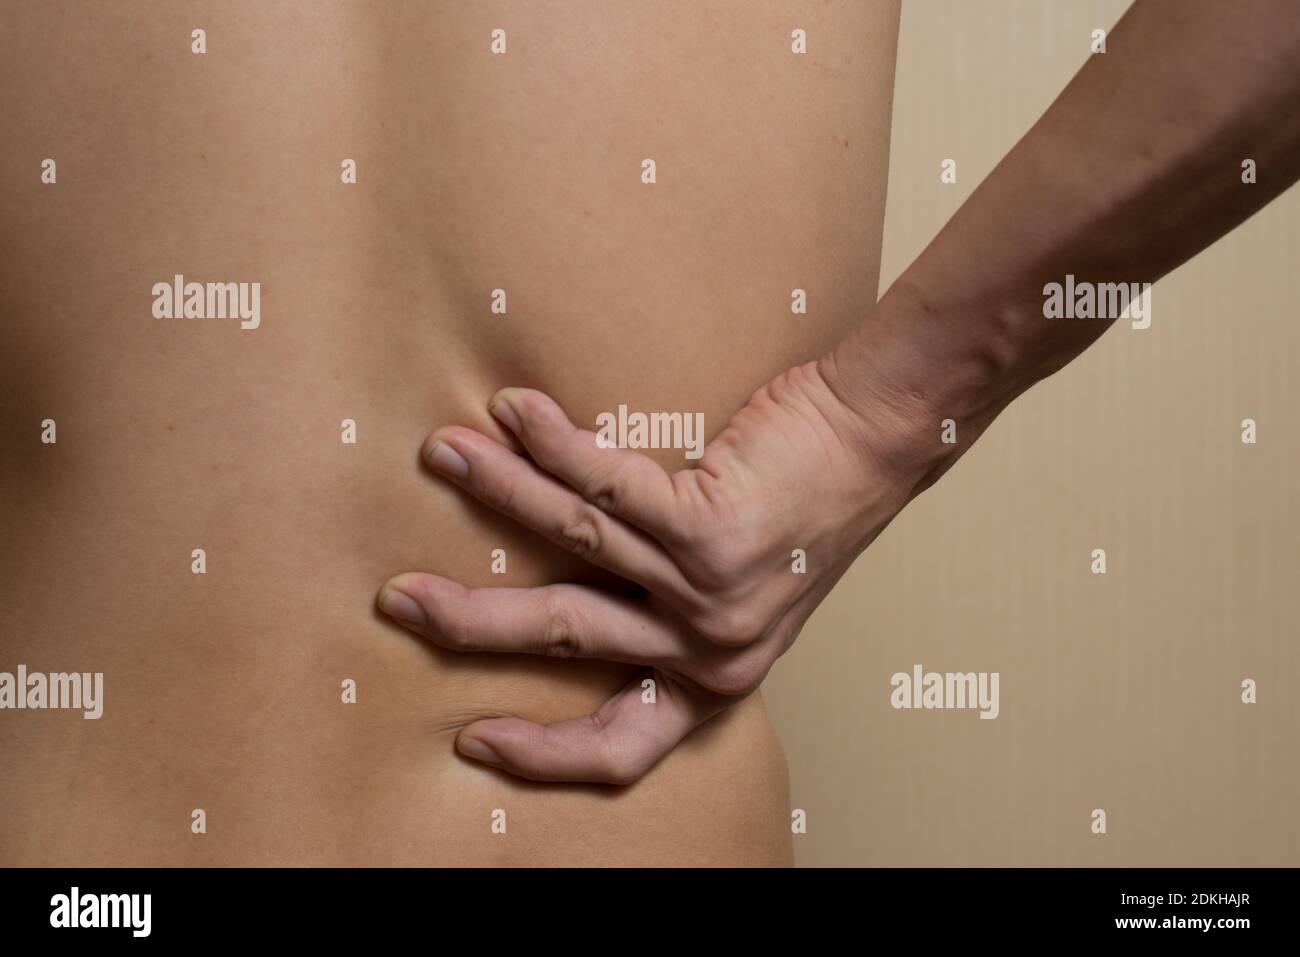 Midsection Of Shirtless Man With Back Pain Stock Photo